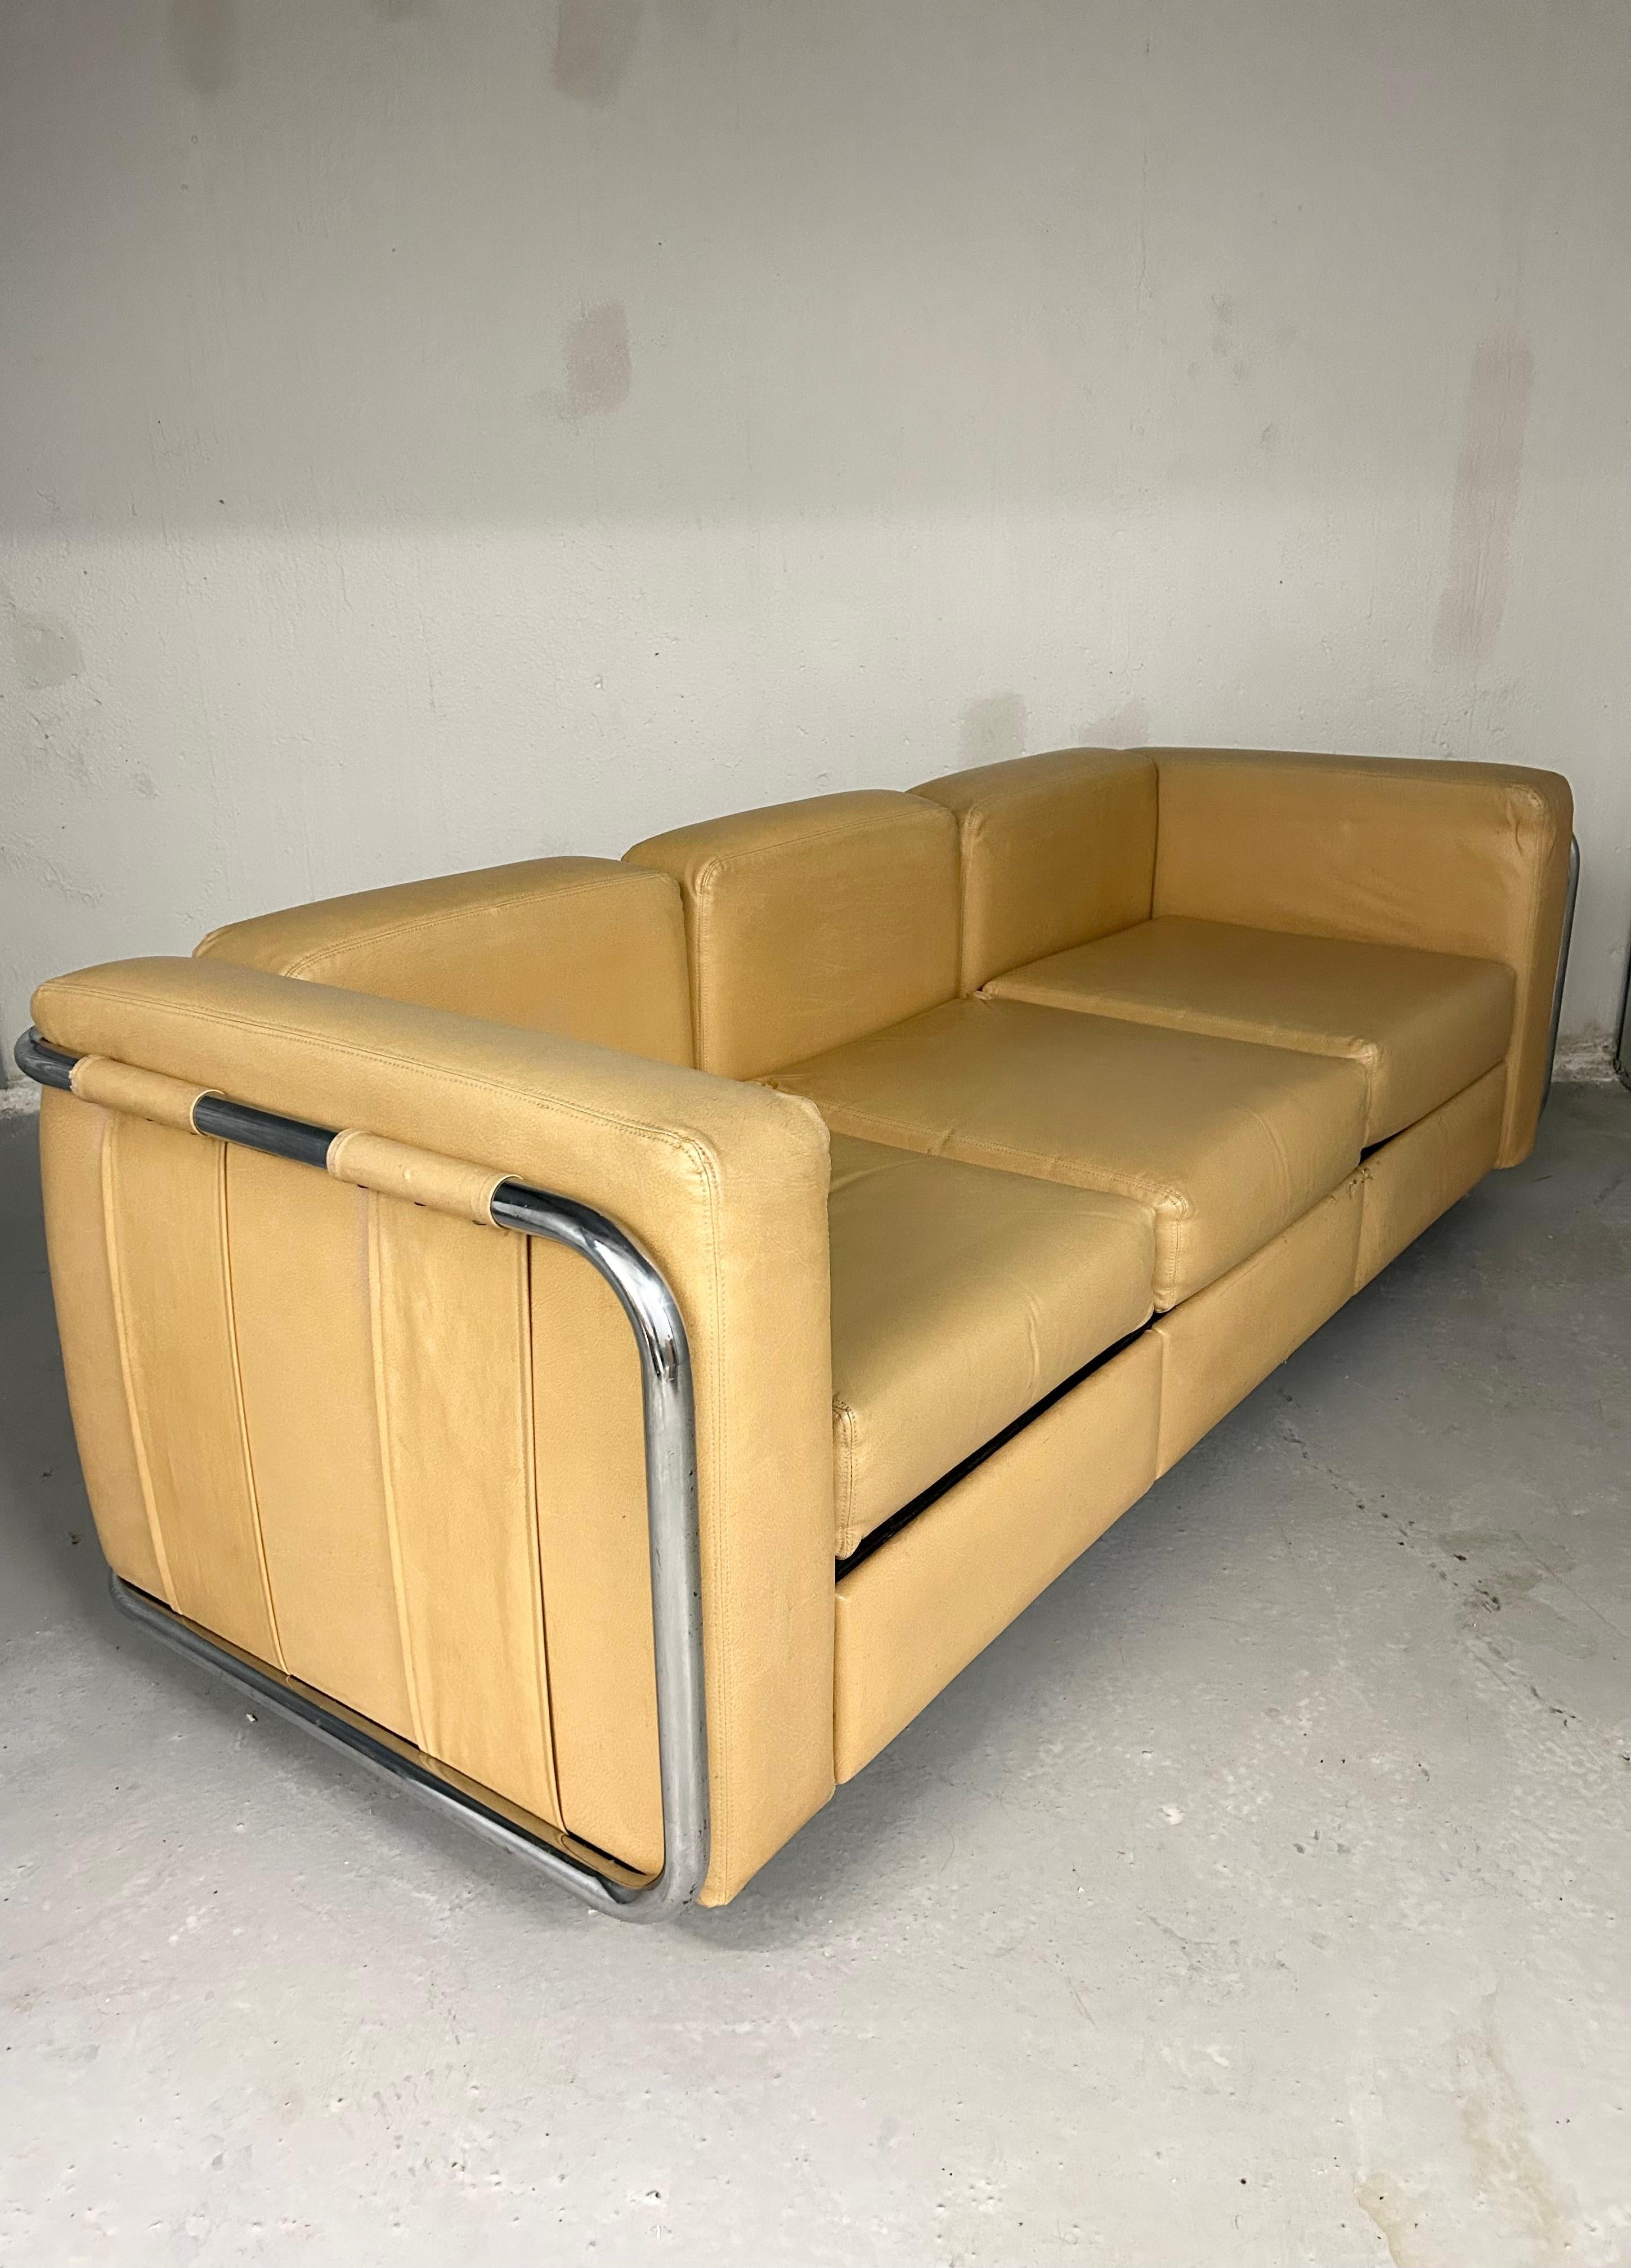 1970s Thonet sofa with wrap around chrome frame and strap detail. Faux leather upholstery and chrome have normal wear for age. Original tags.

80” length
26” height
31” depth
16” seat height